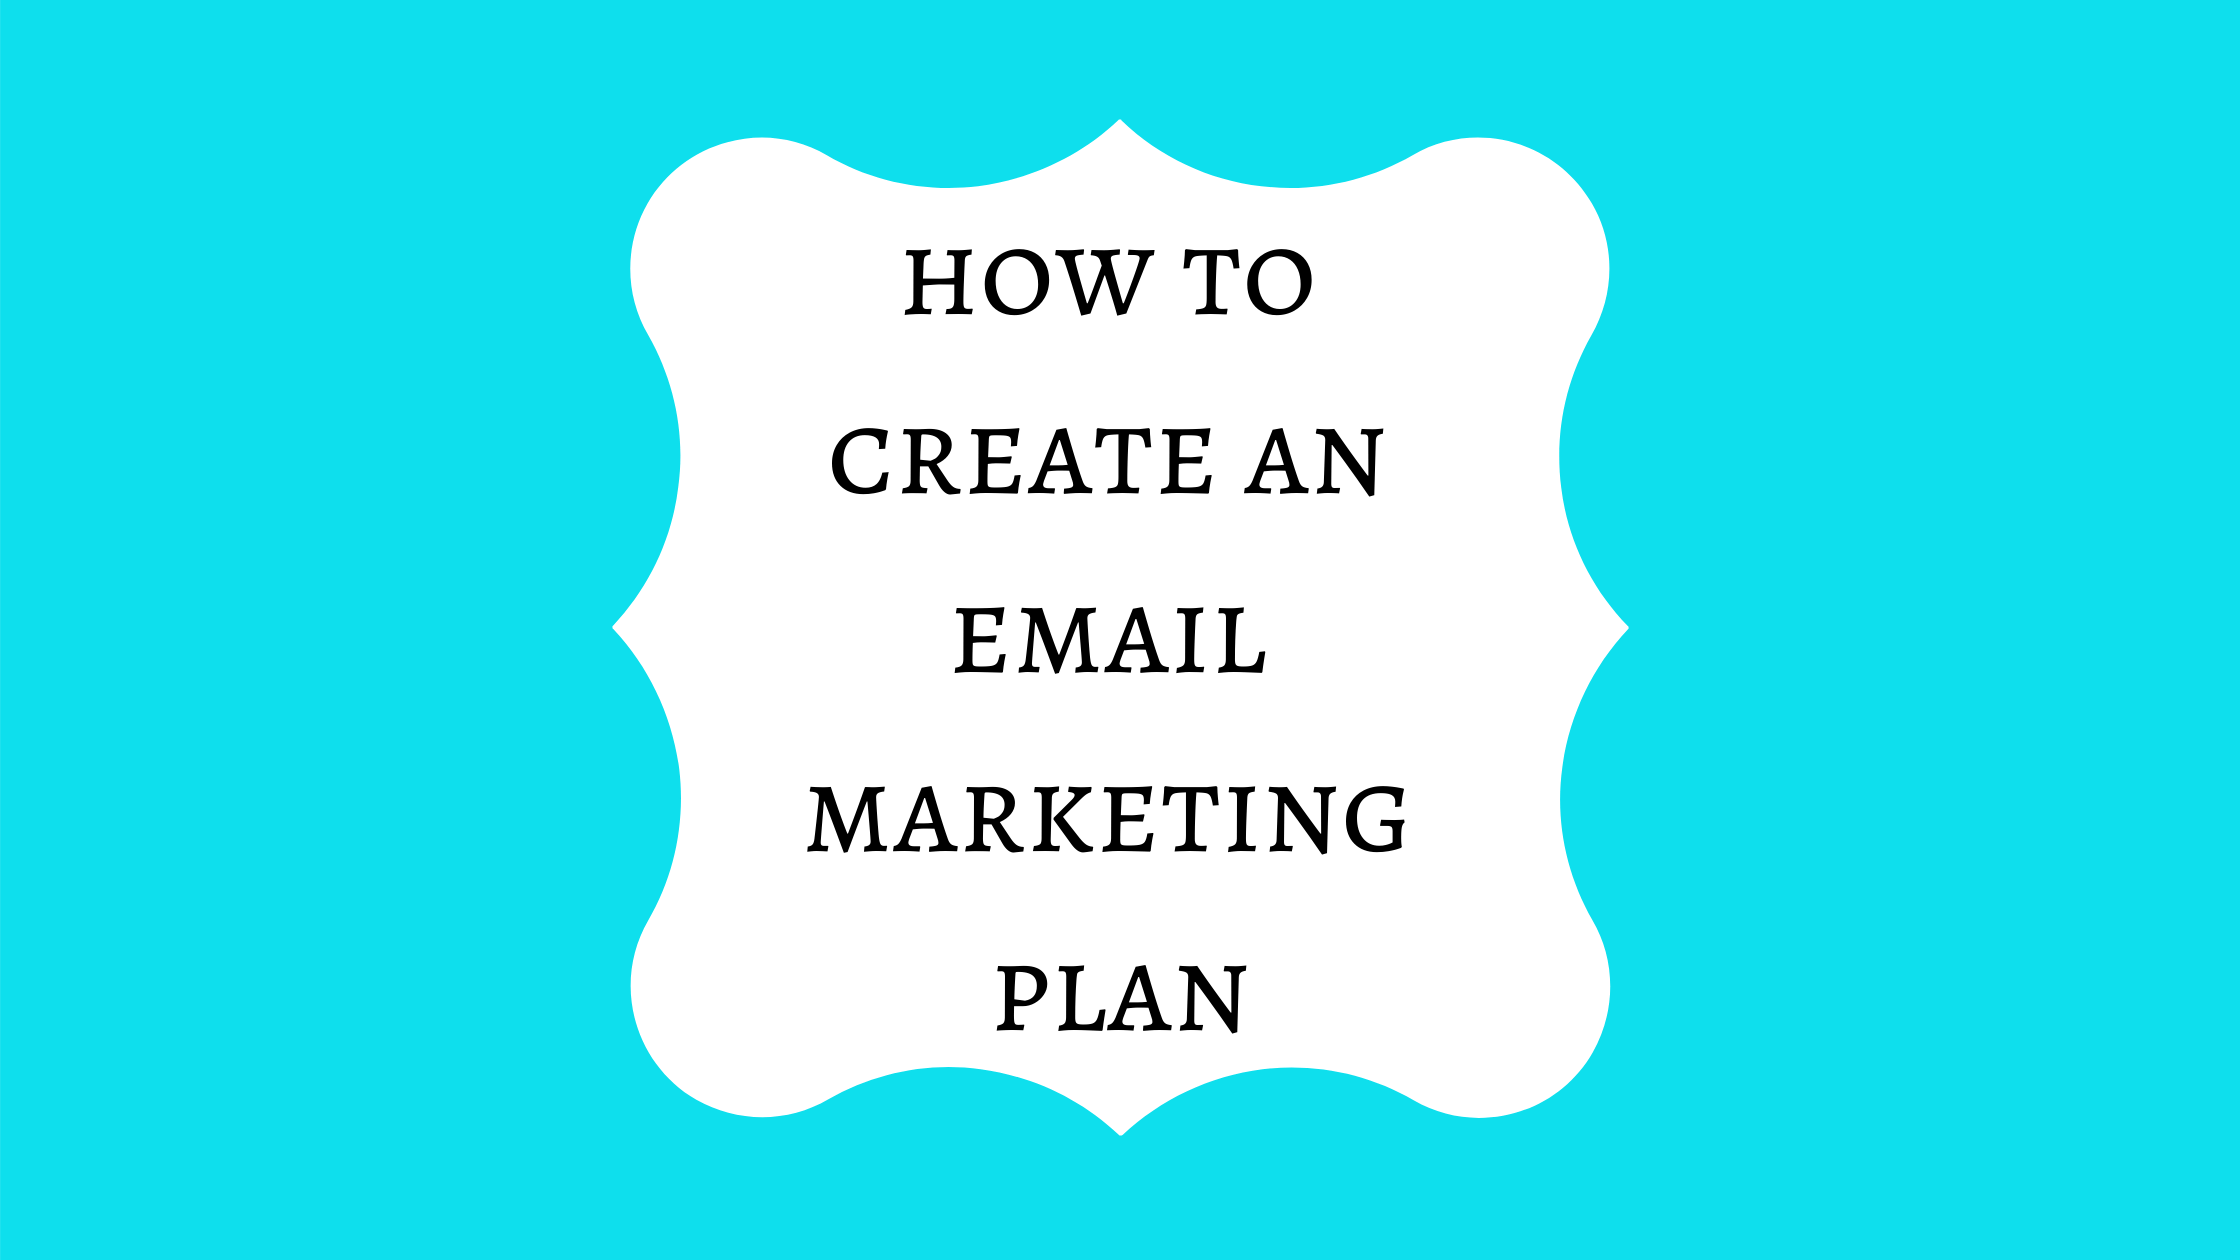 How to create an email marketing plan for fiction authors